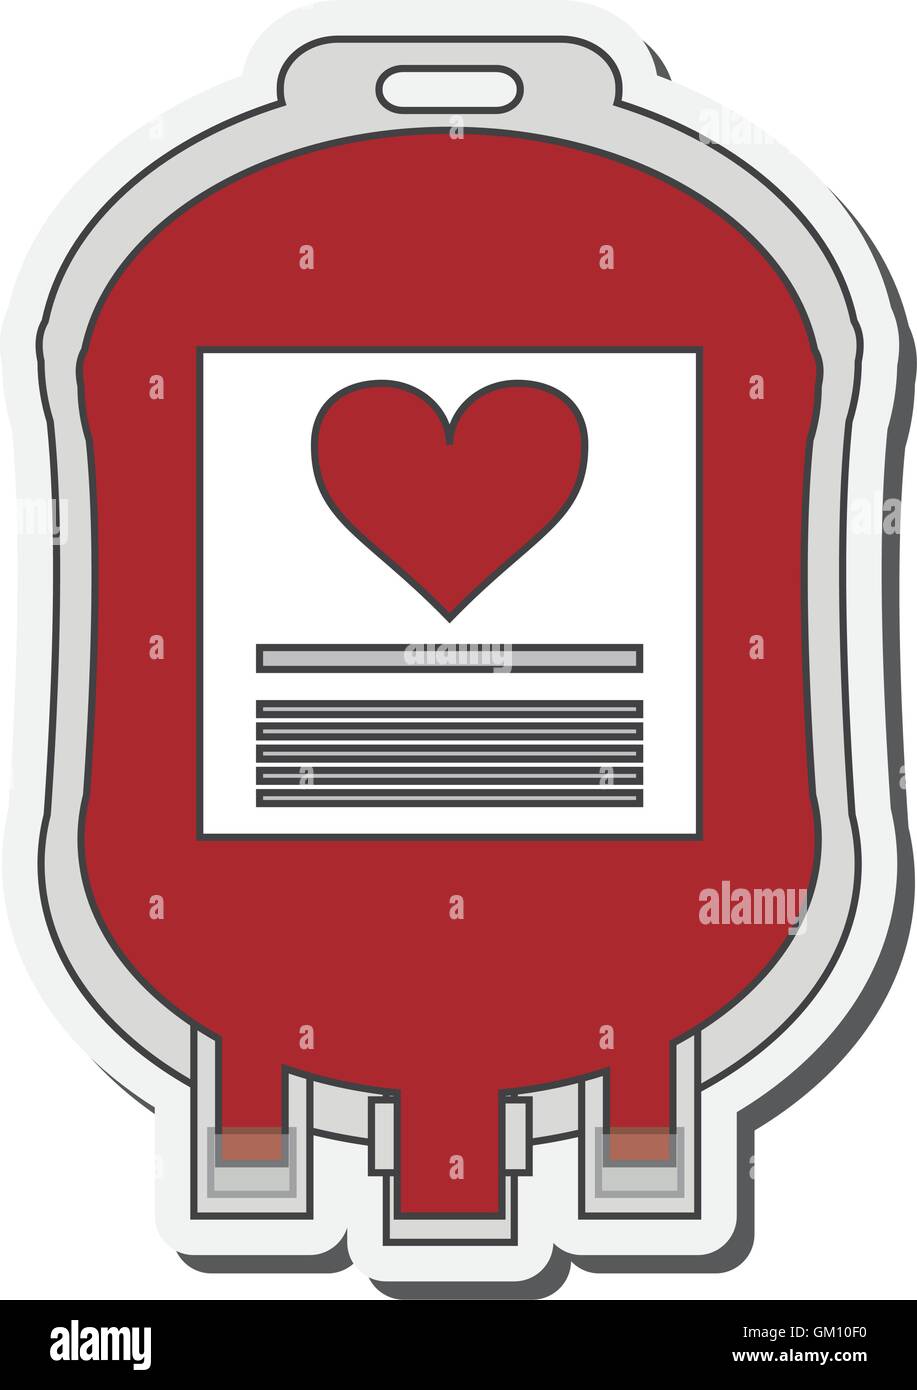 blood bag icon Stock Vector